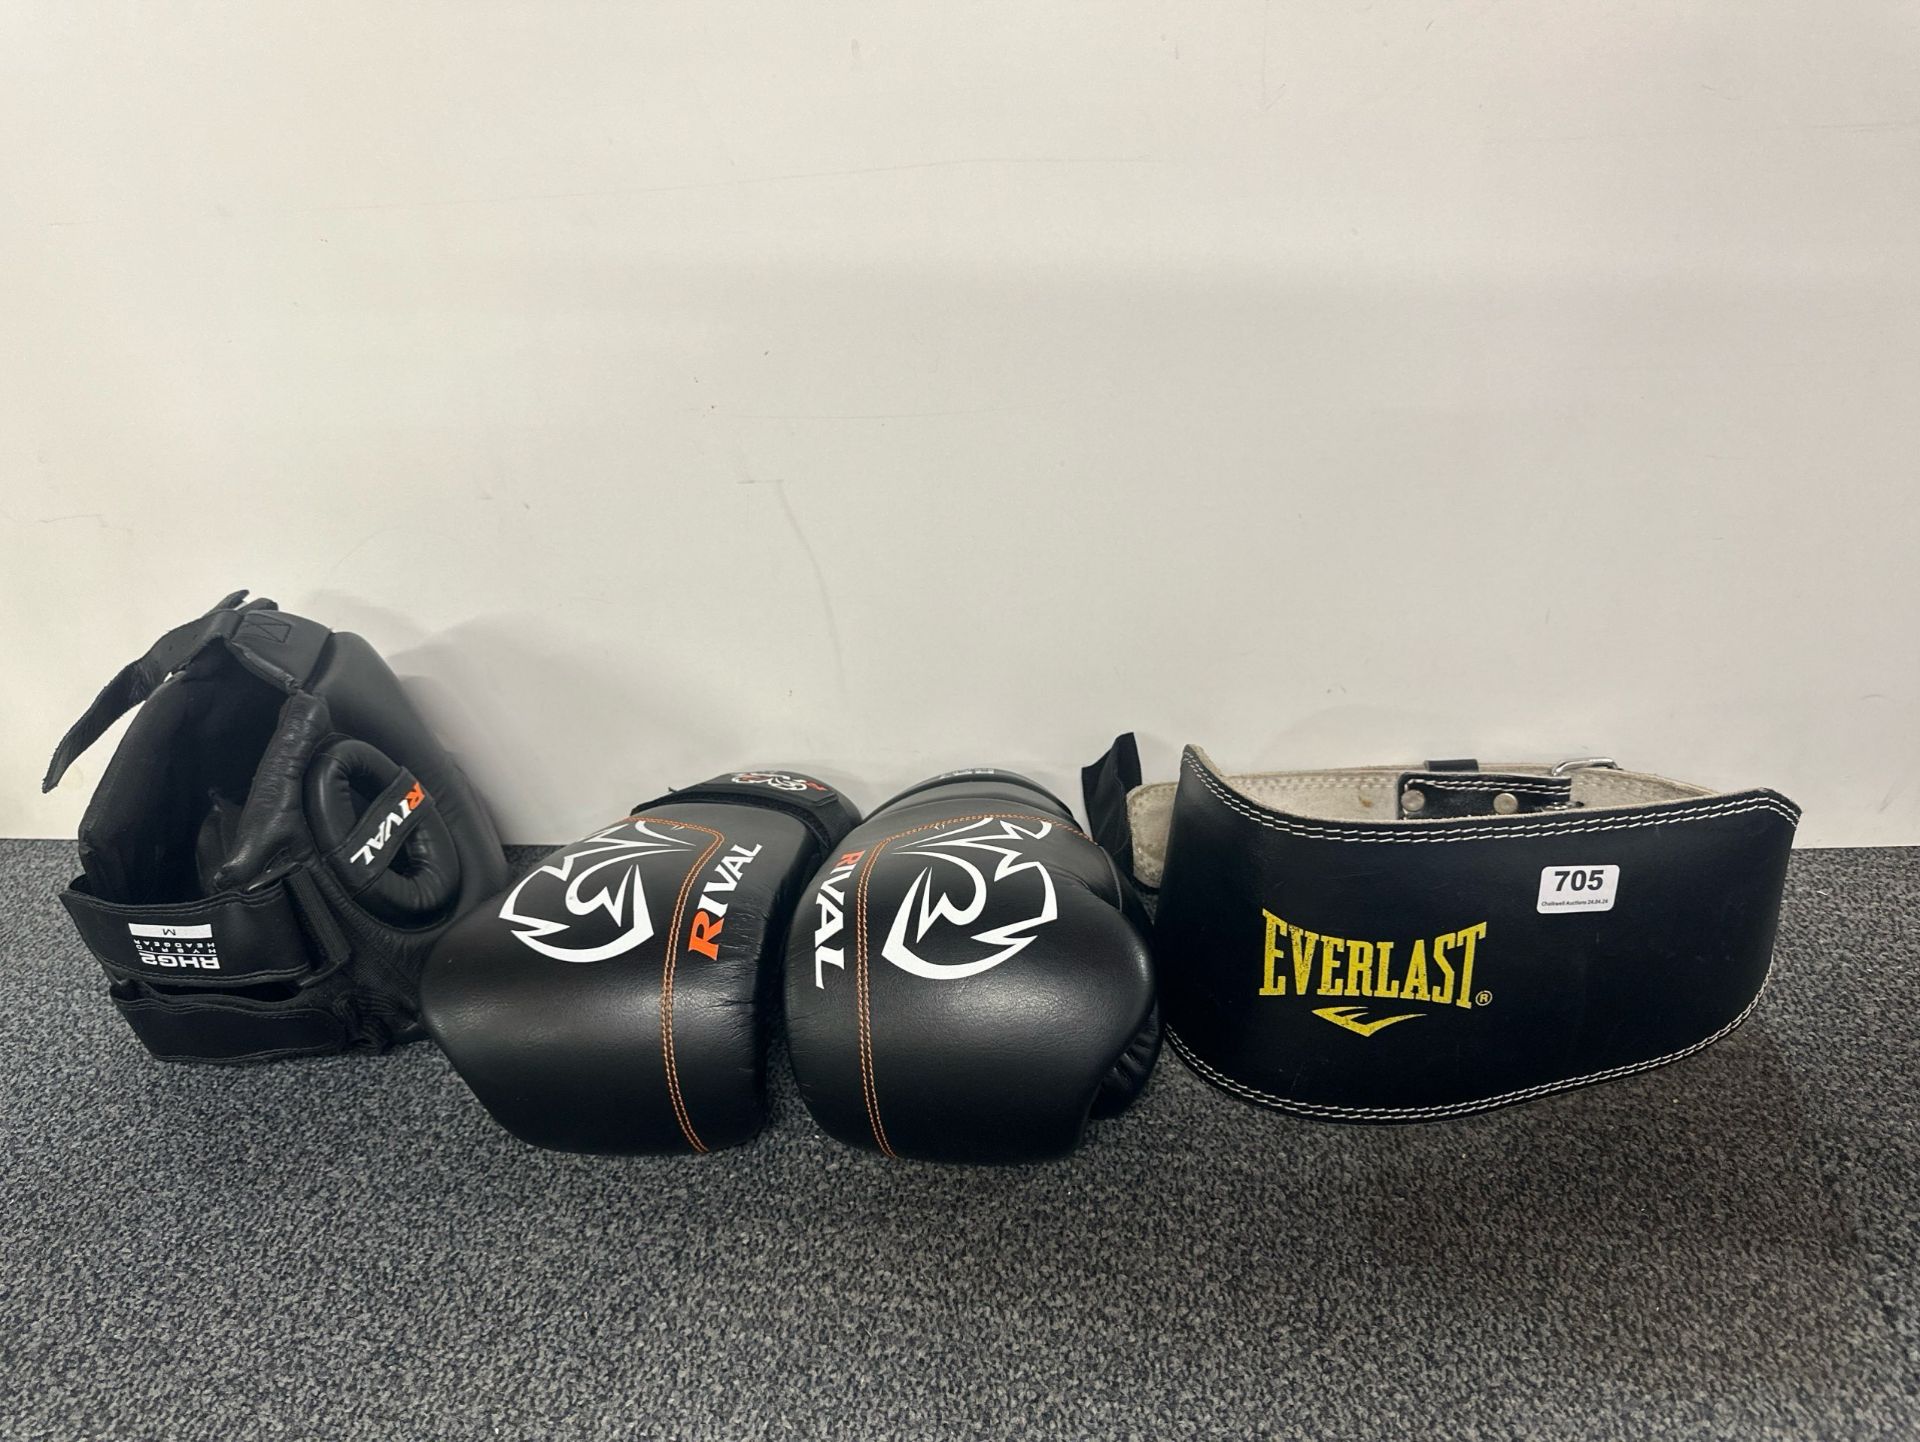 A pair of boxing gloves, helmet and belt.